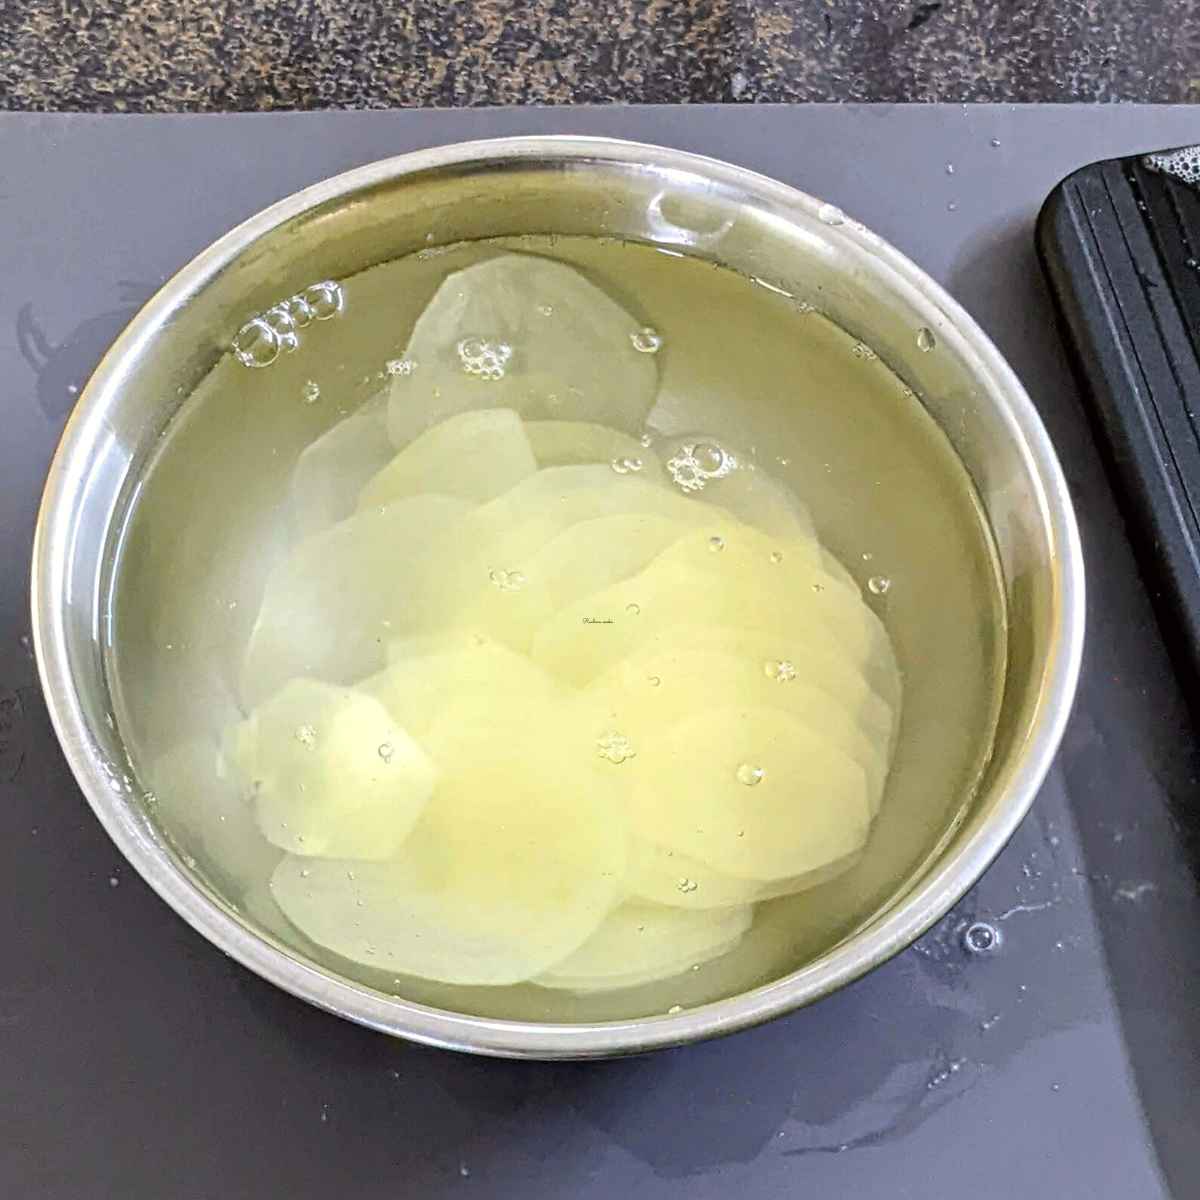 Thin potato slices soaked in cold water